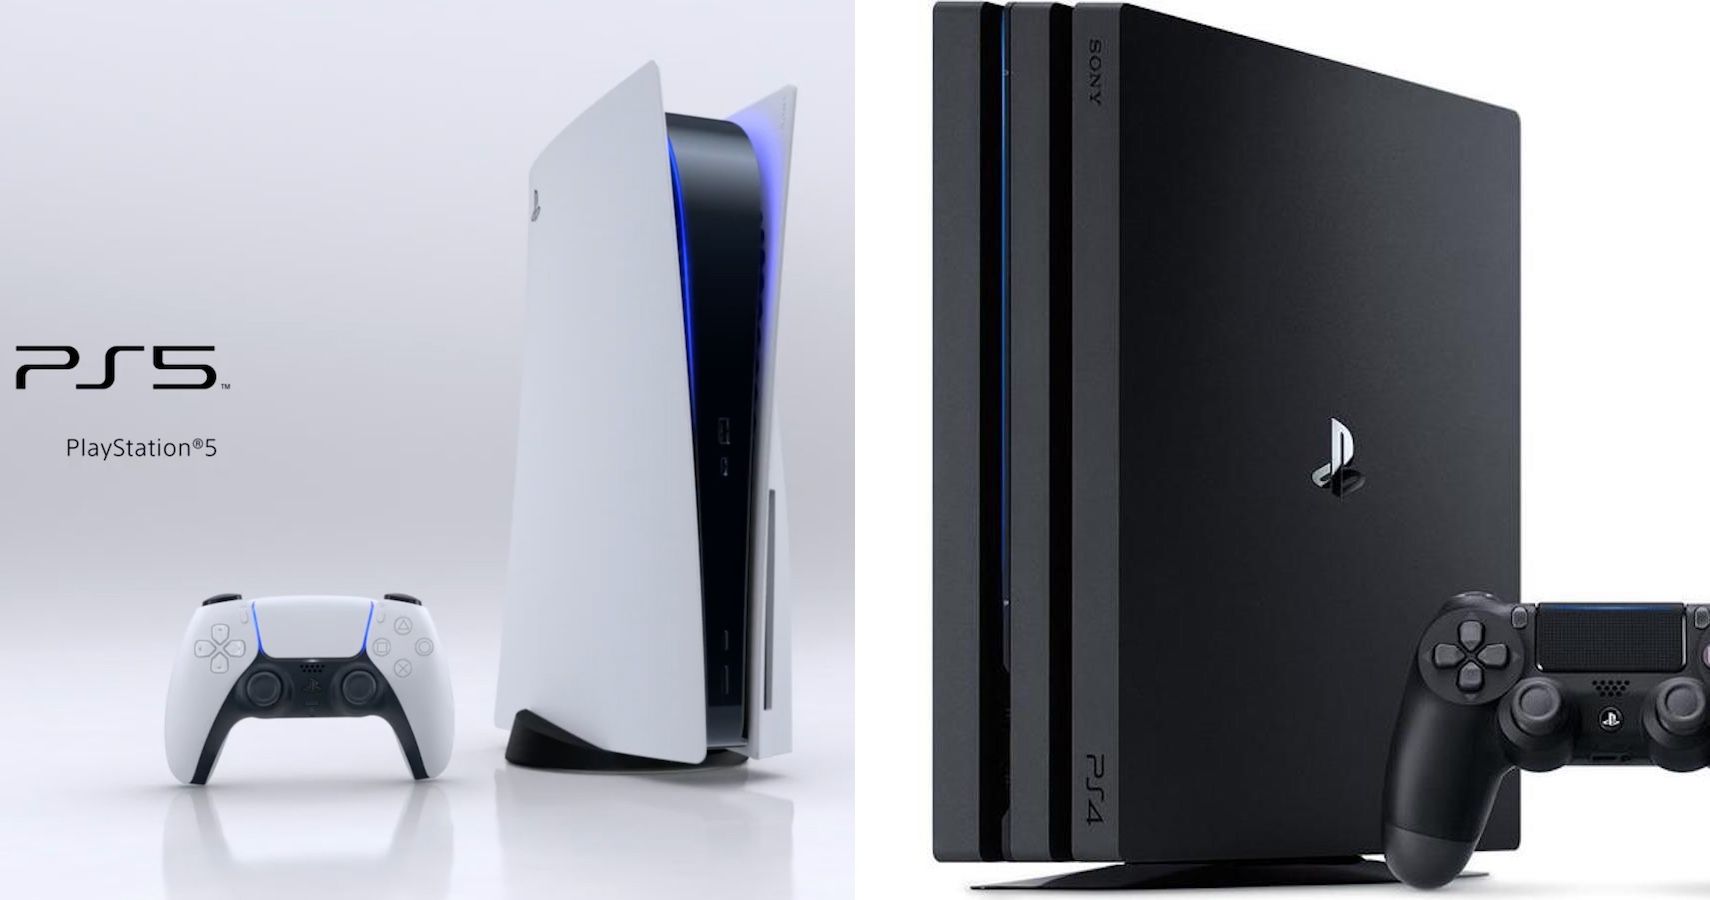 PS4 and PS5 side by side